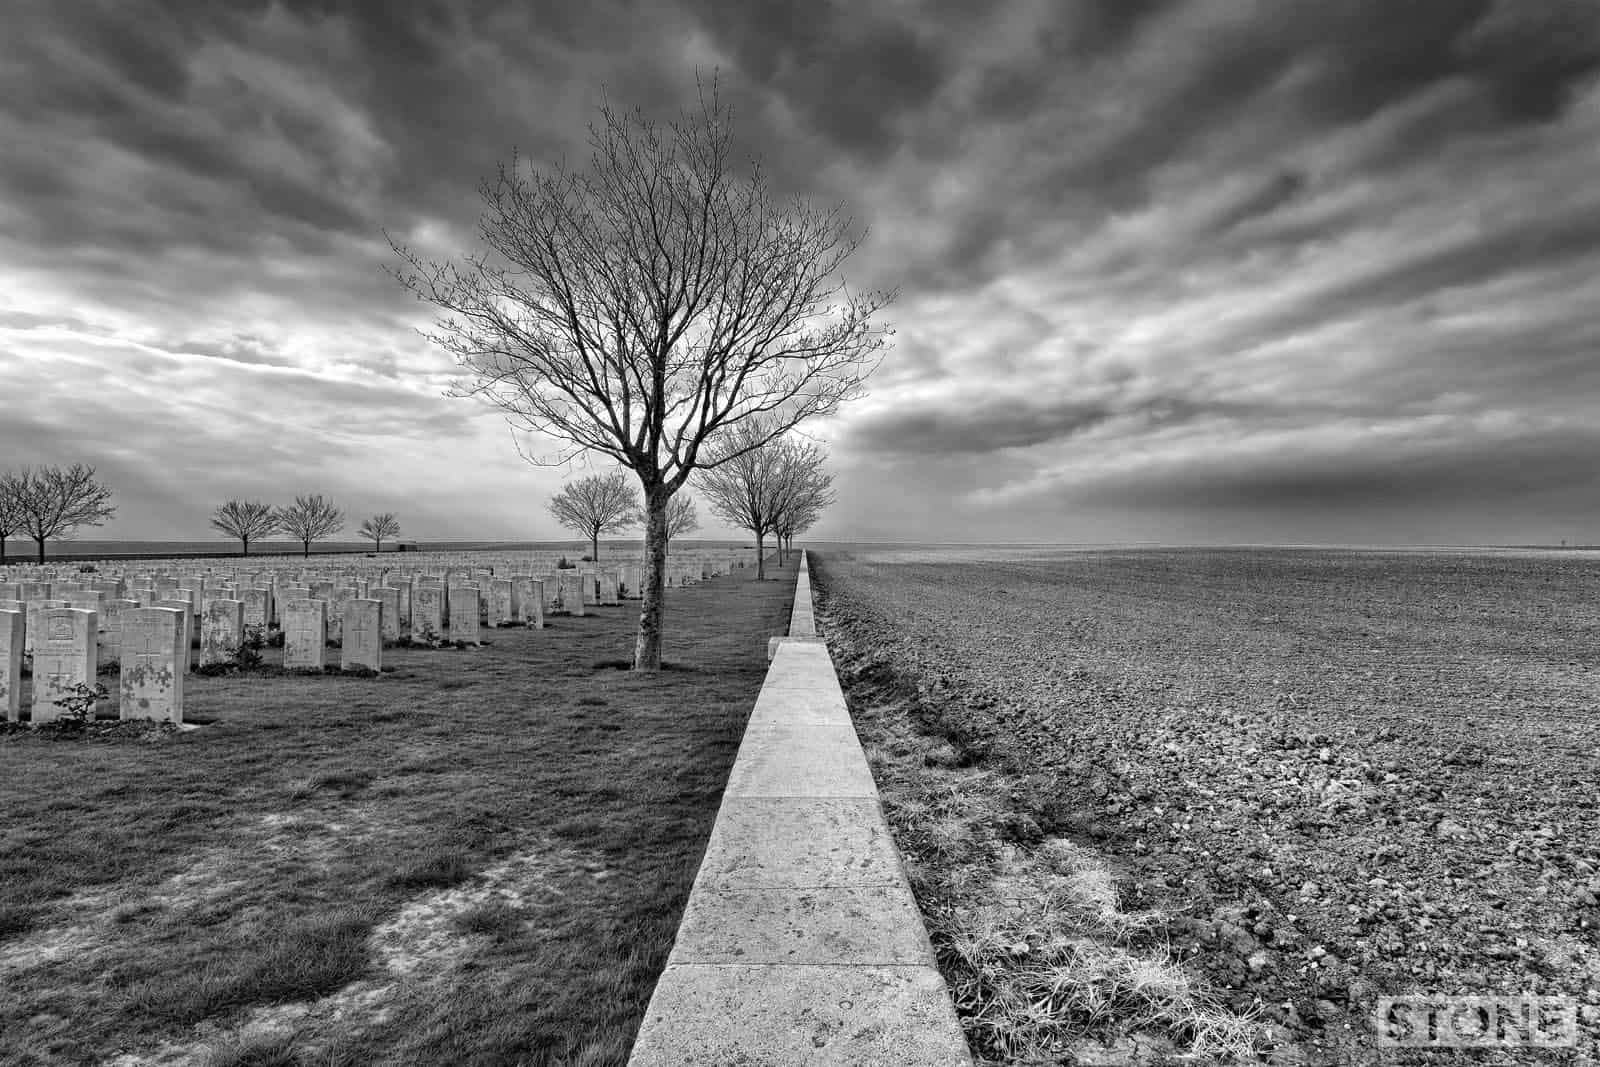 Vanishing Point: Mash Valley and Ovillers